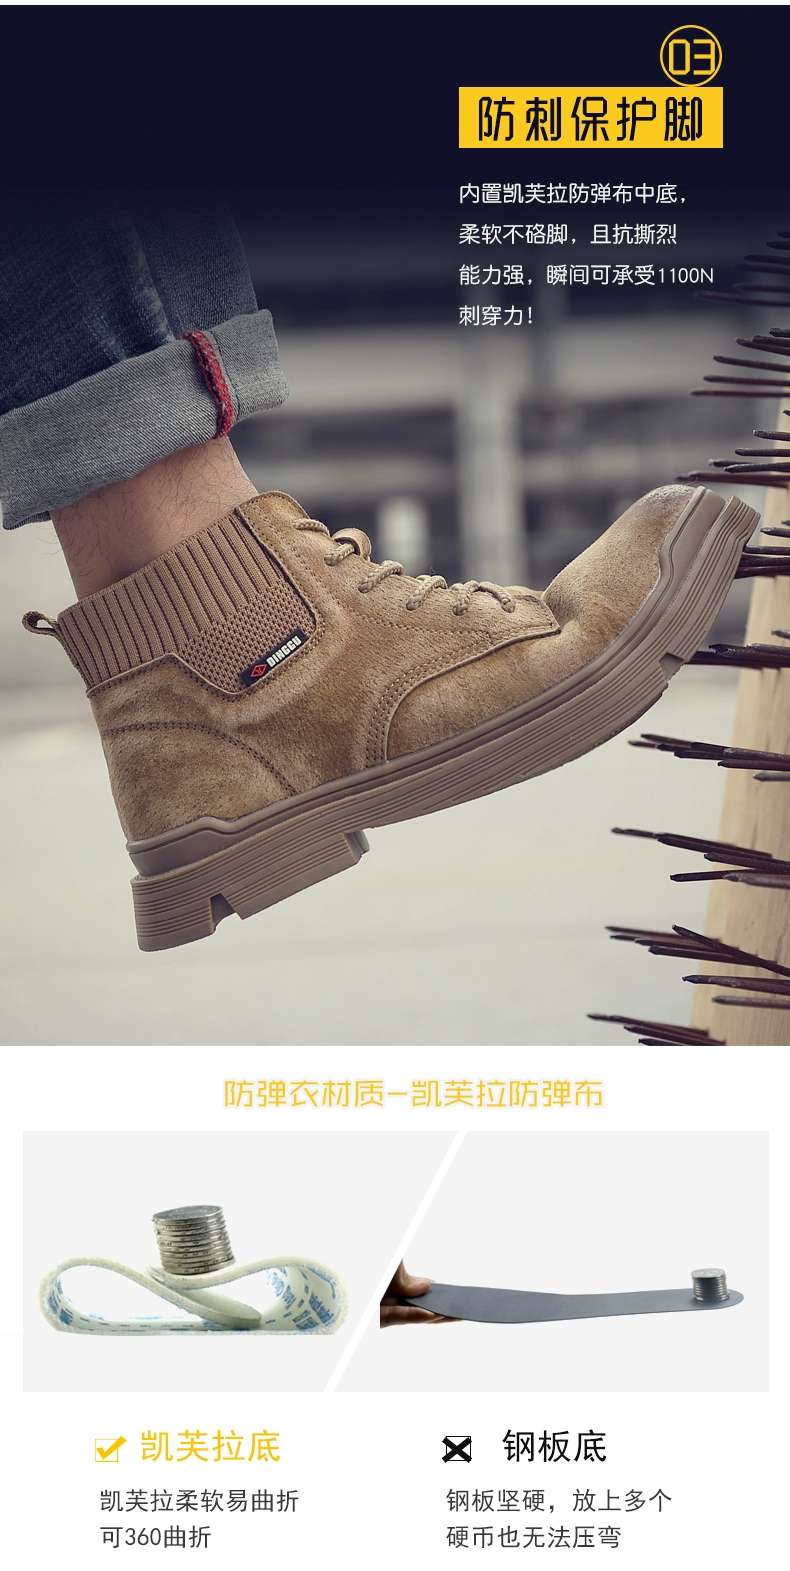 Labor protection shoes for men, anti-smash and anti-puncture, lightweight soft-soled steel-toe welder high-top old protection belt steel plate work shoes